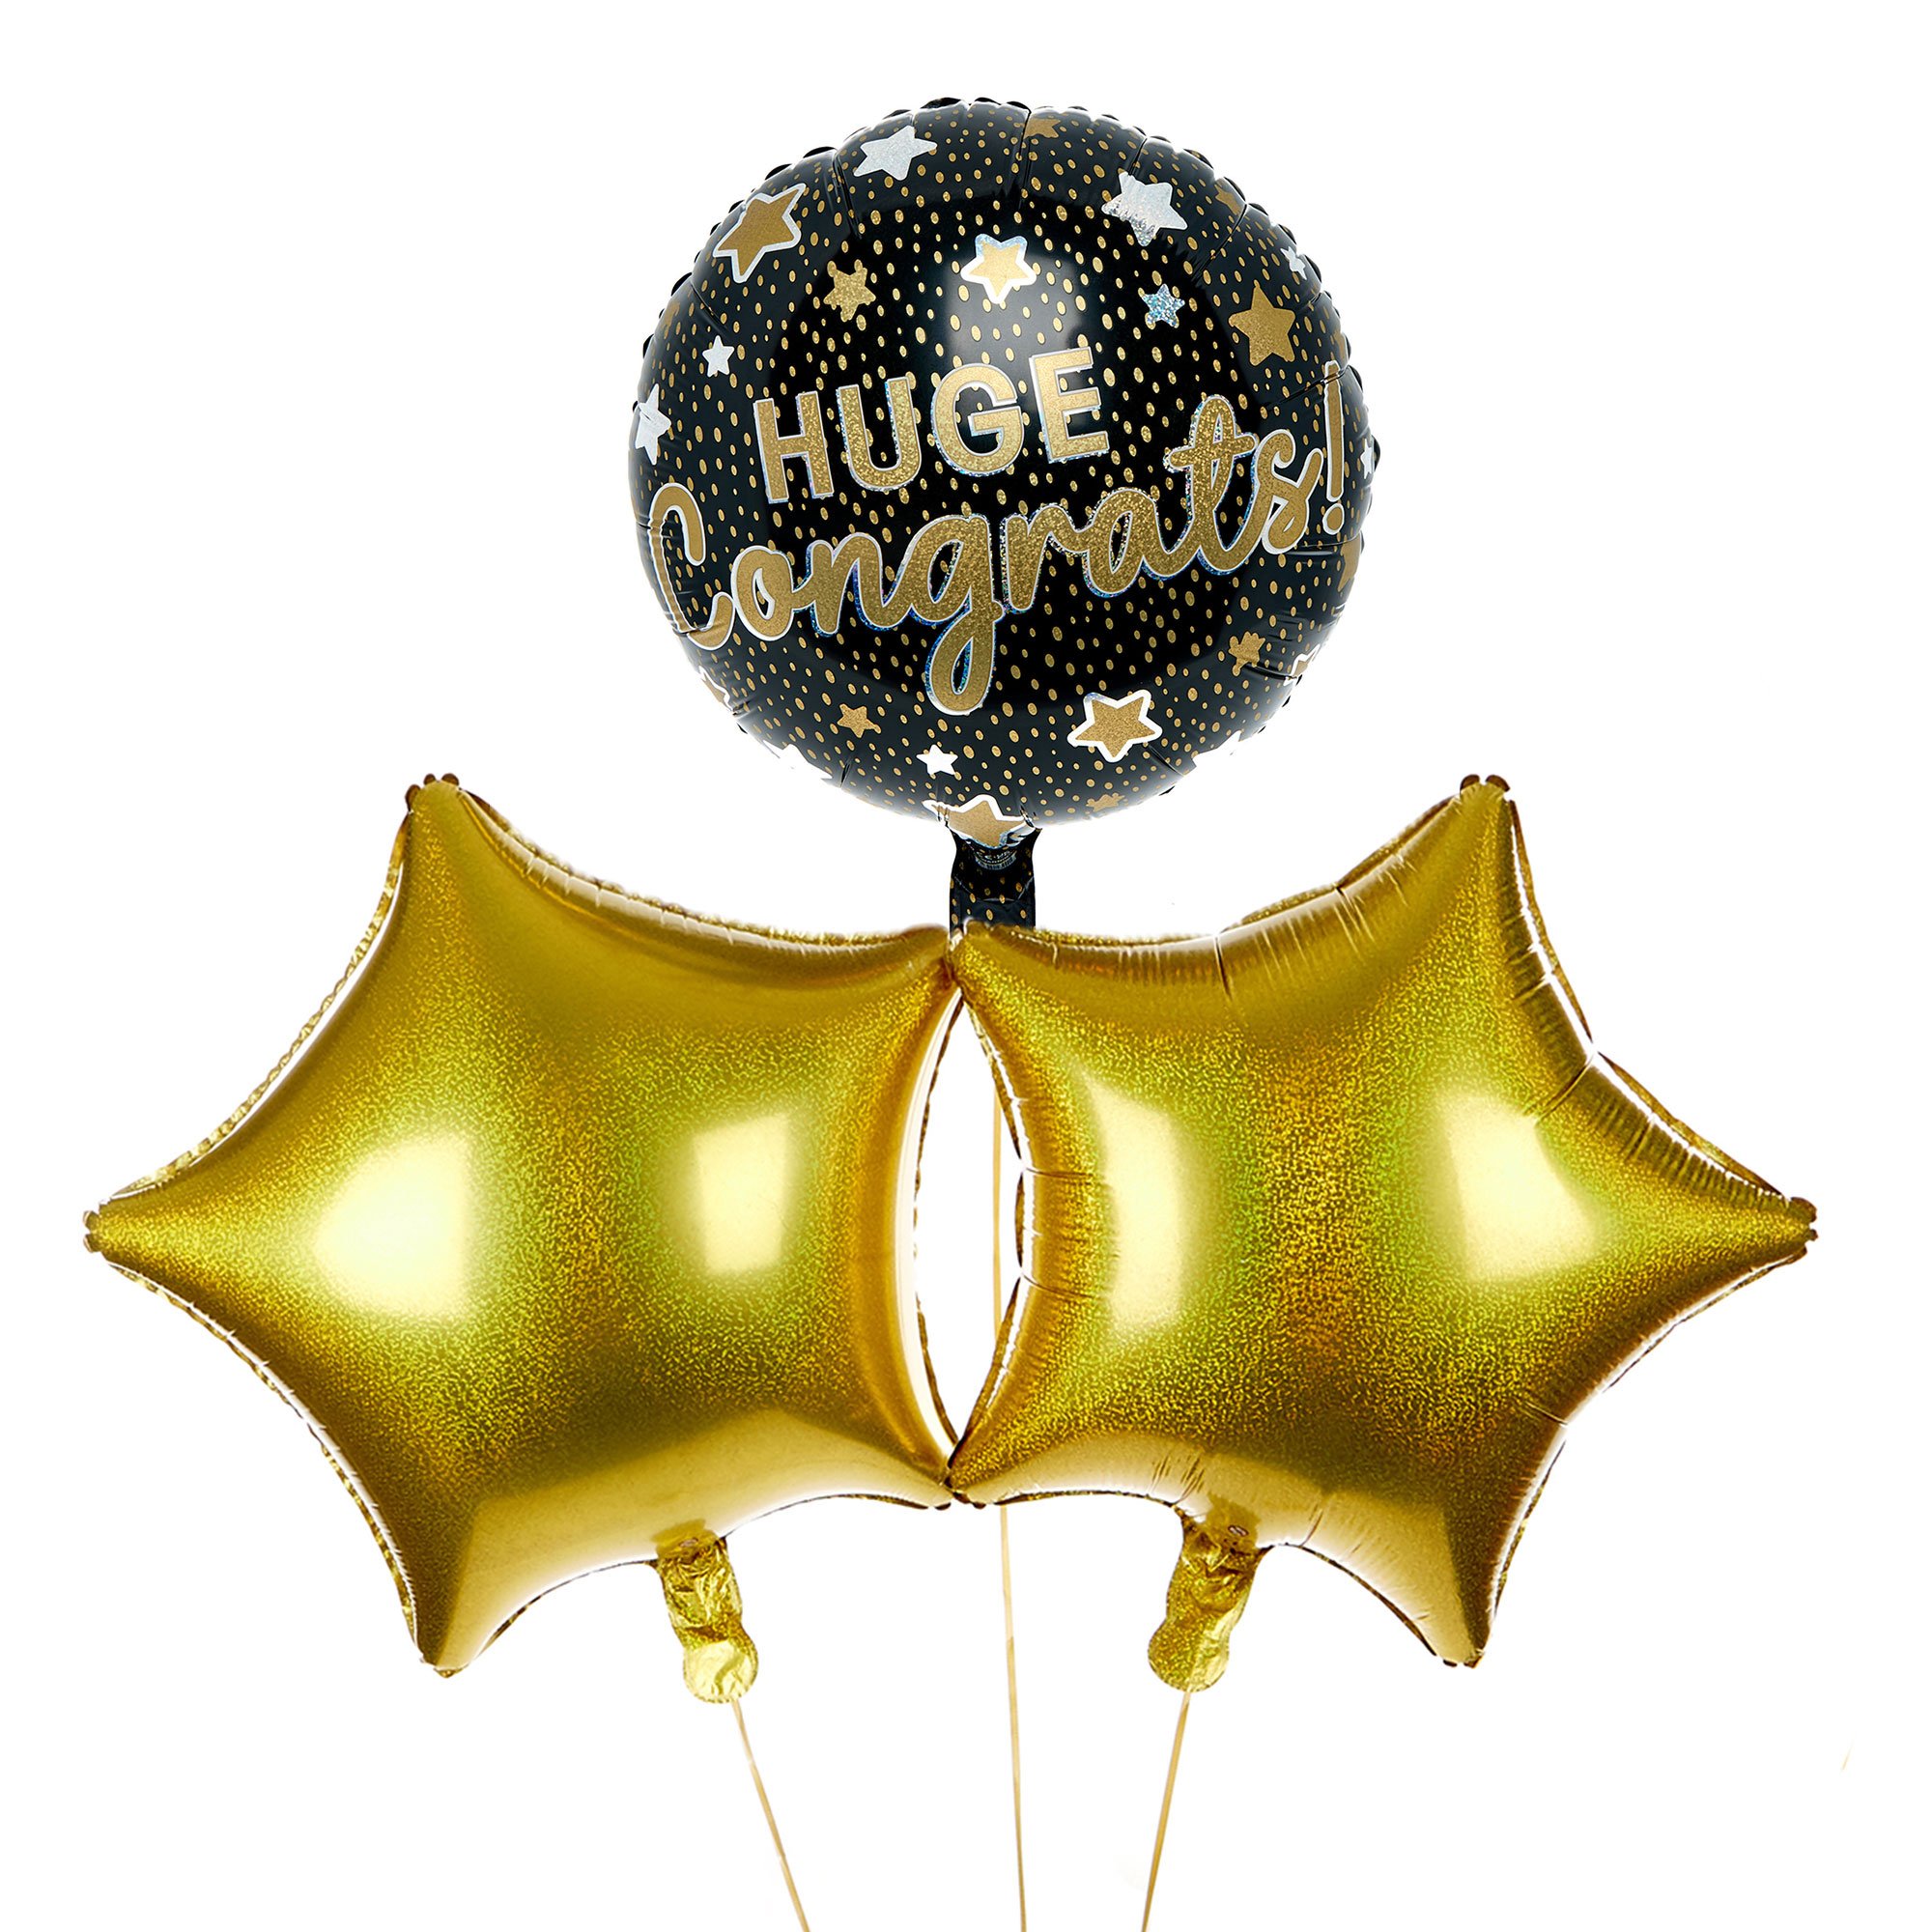 Huge Congrats Balloon Bouquet - DELIVERED INFLATED!